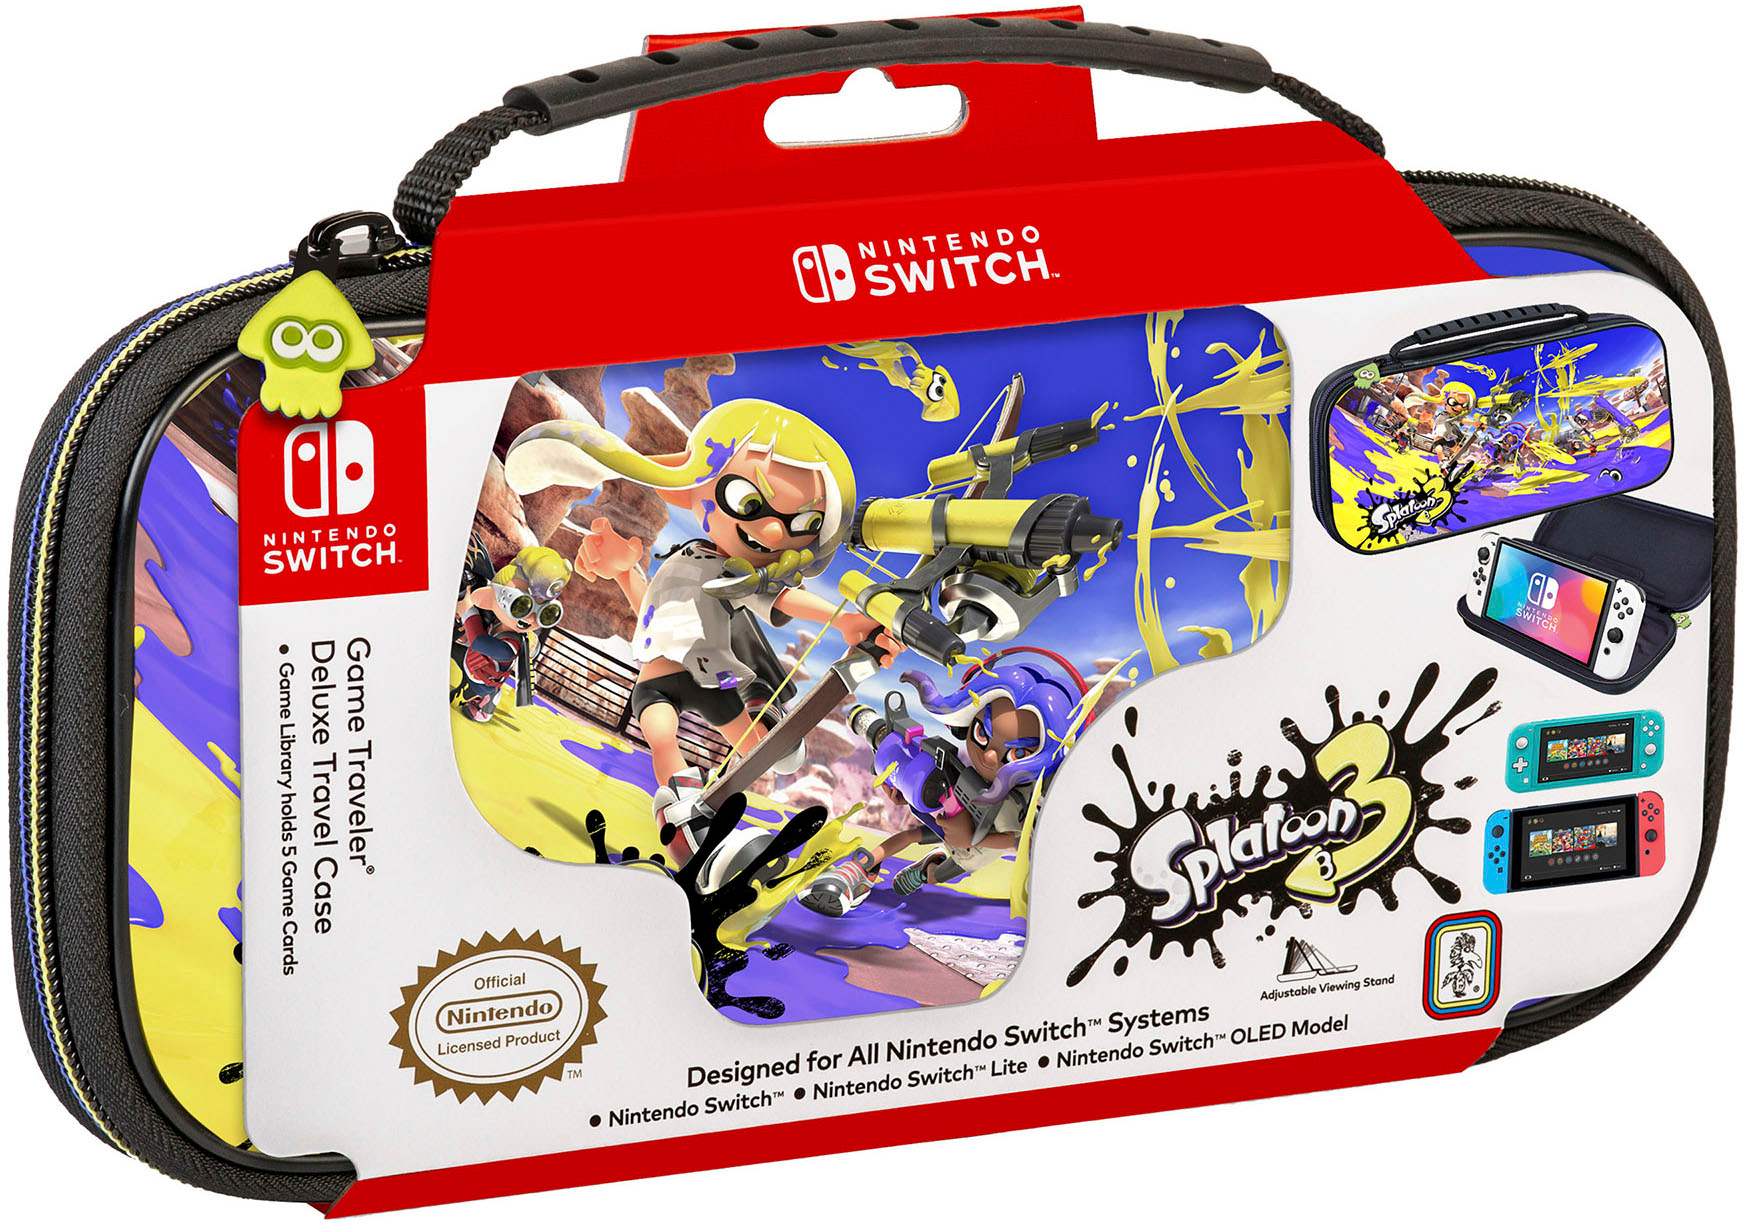 RDS Industries - Nintendo Switch Game Traveler Deluxe Splatoon 3 Travel Case designed for all Nintendo Switch systems